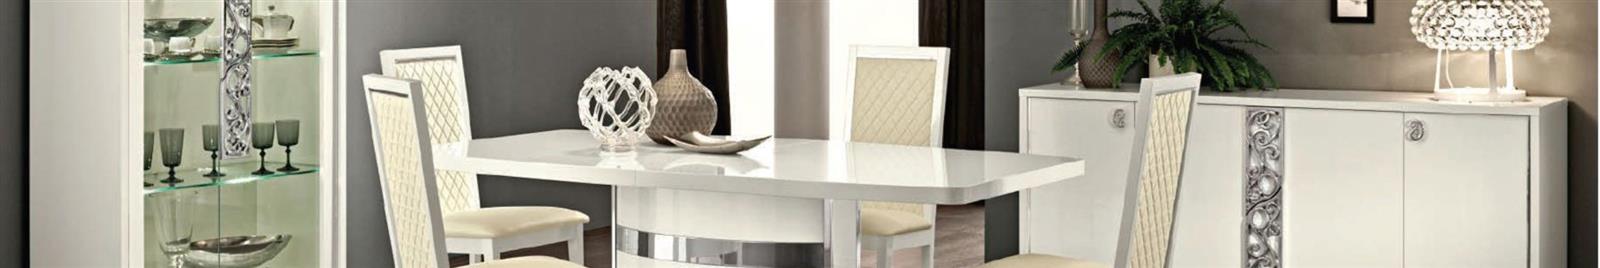 Roma Day - White - Modern Dining Room Furniture